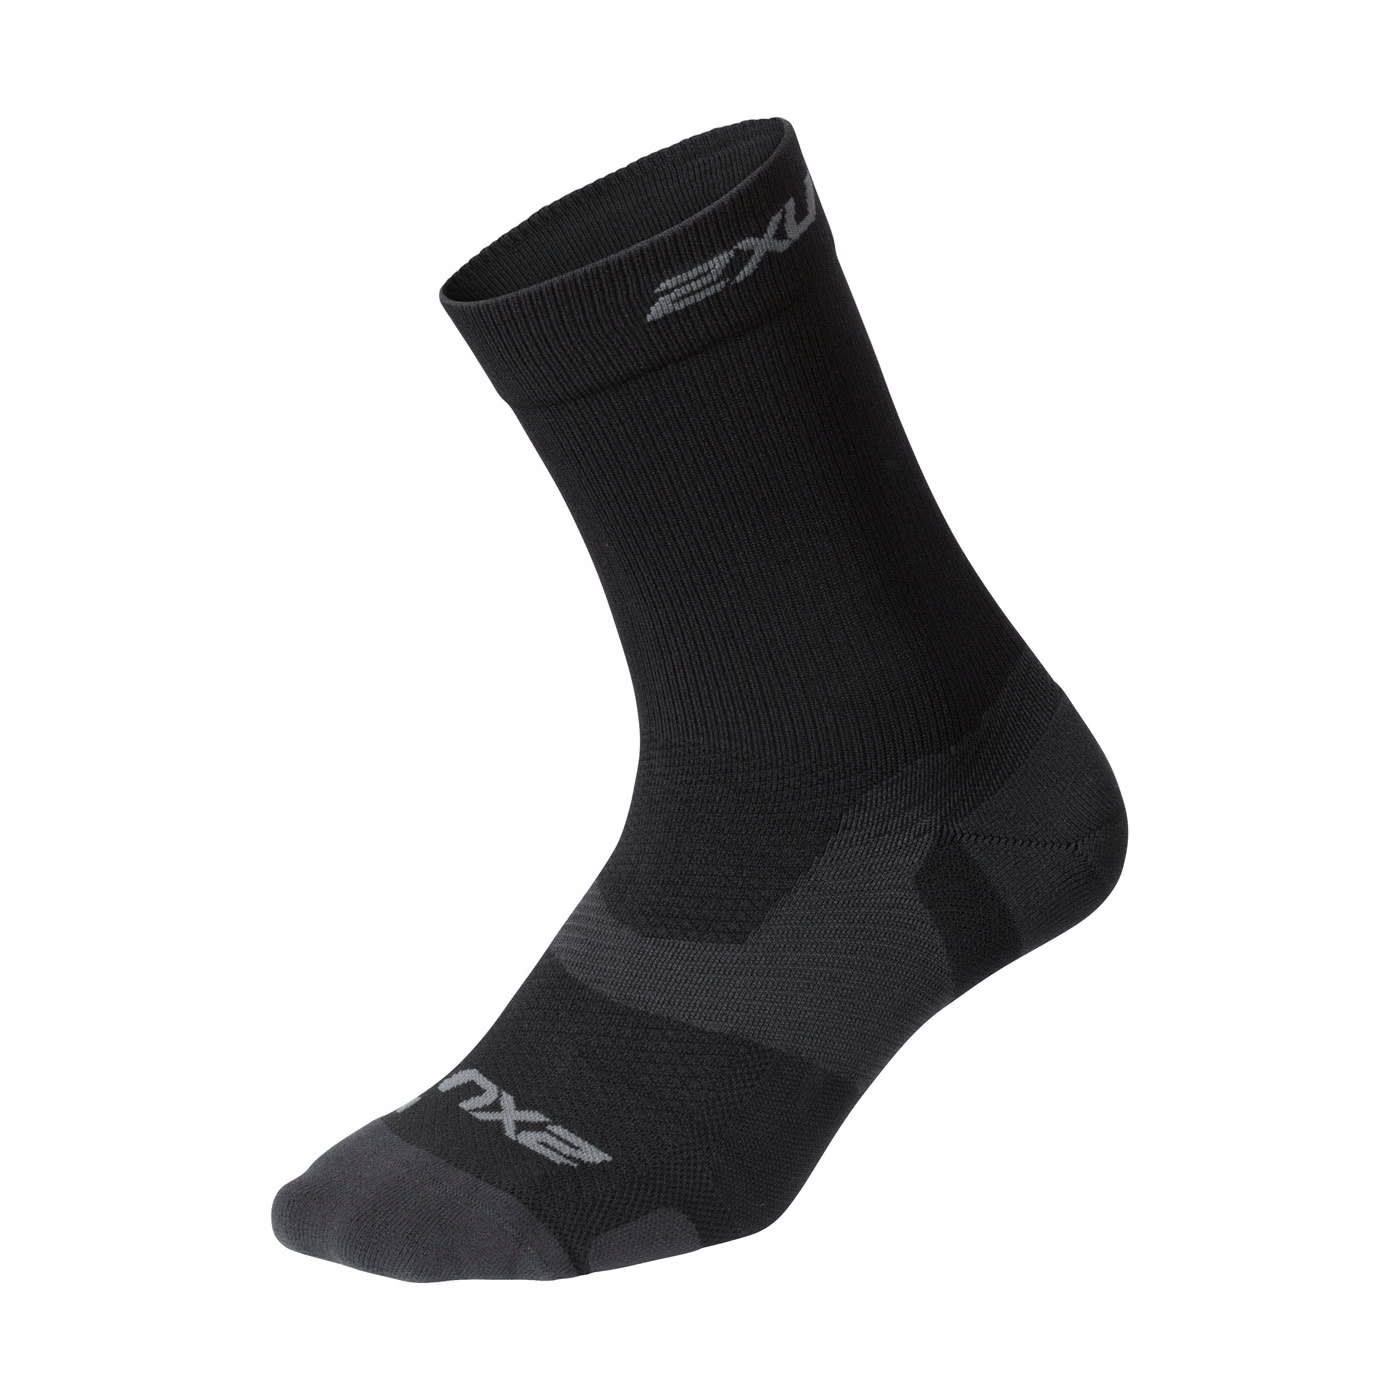 Buy 2XU Vectr Light Cushion Crew Sock from Outnorth